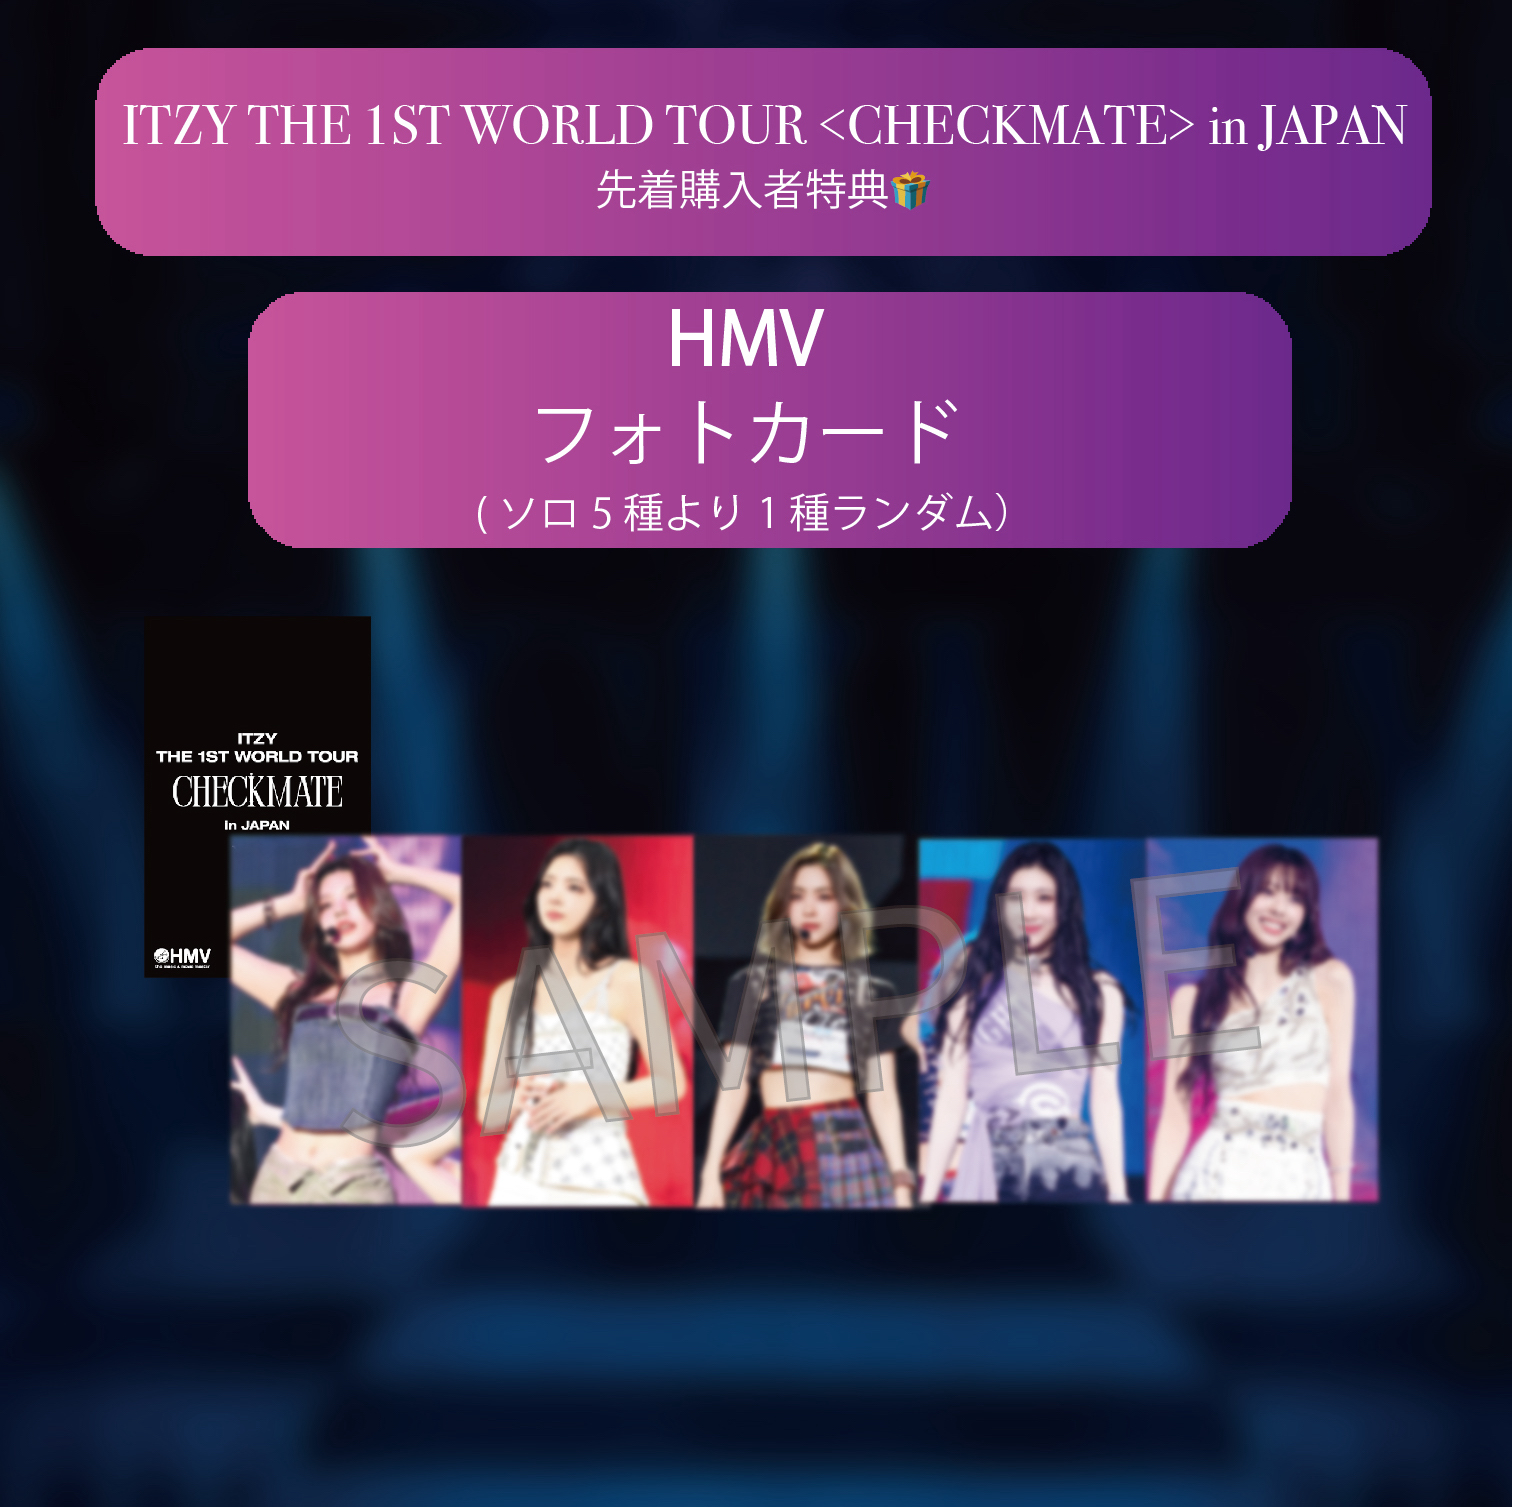 ITZY THE 1ST WORLD TOUR ＜CHECKMATE＞ in JAPAN』ブルーレイ&DVD 8月